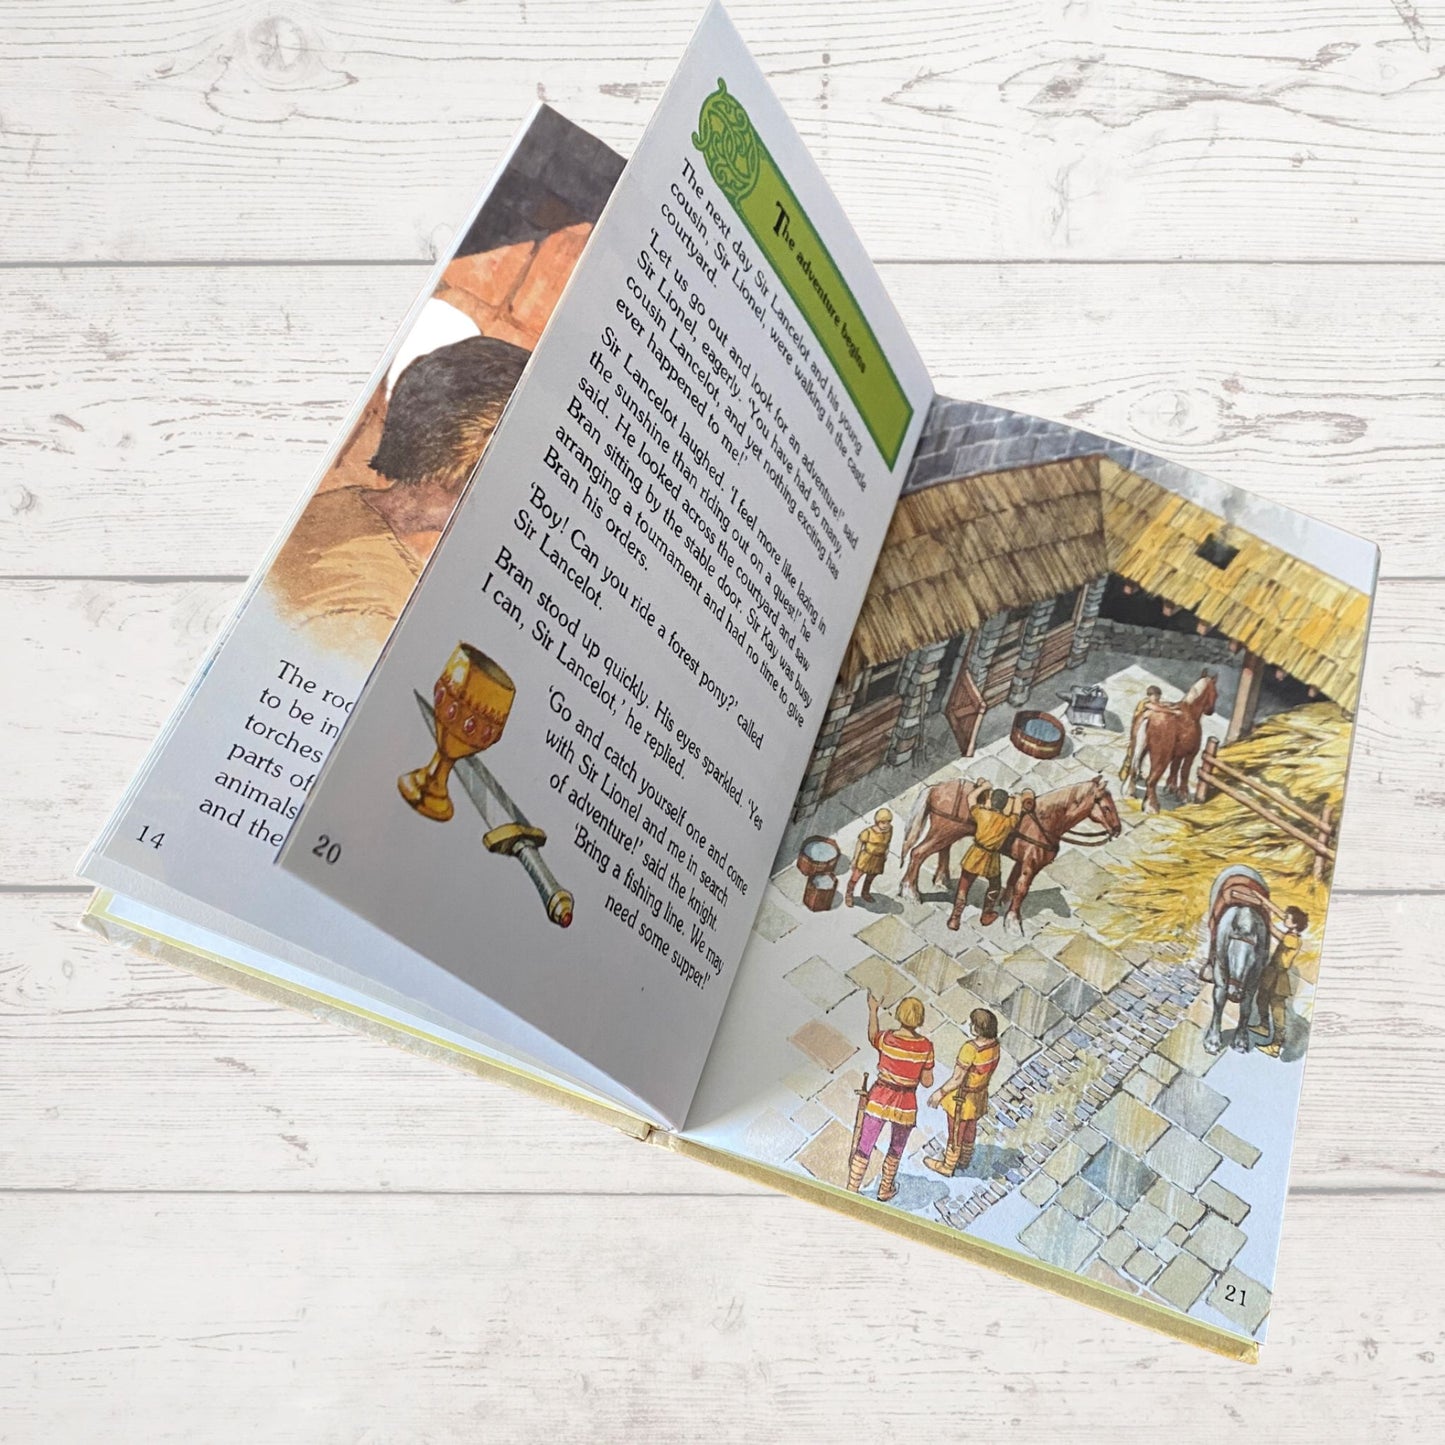 King Arthur and the Knights of the Round Table  : Ladybird book Myths, Fables and Legends. Series 740. Nostalgic gift idea